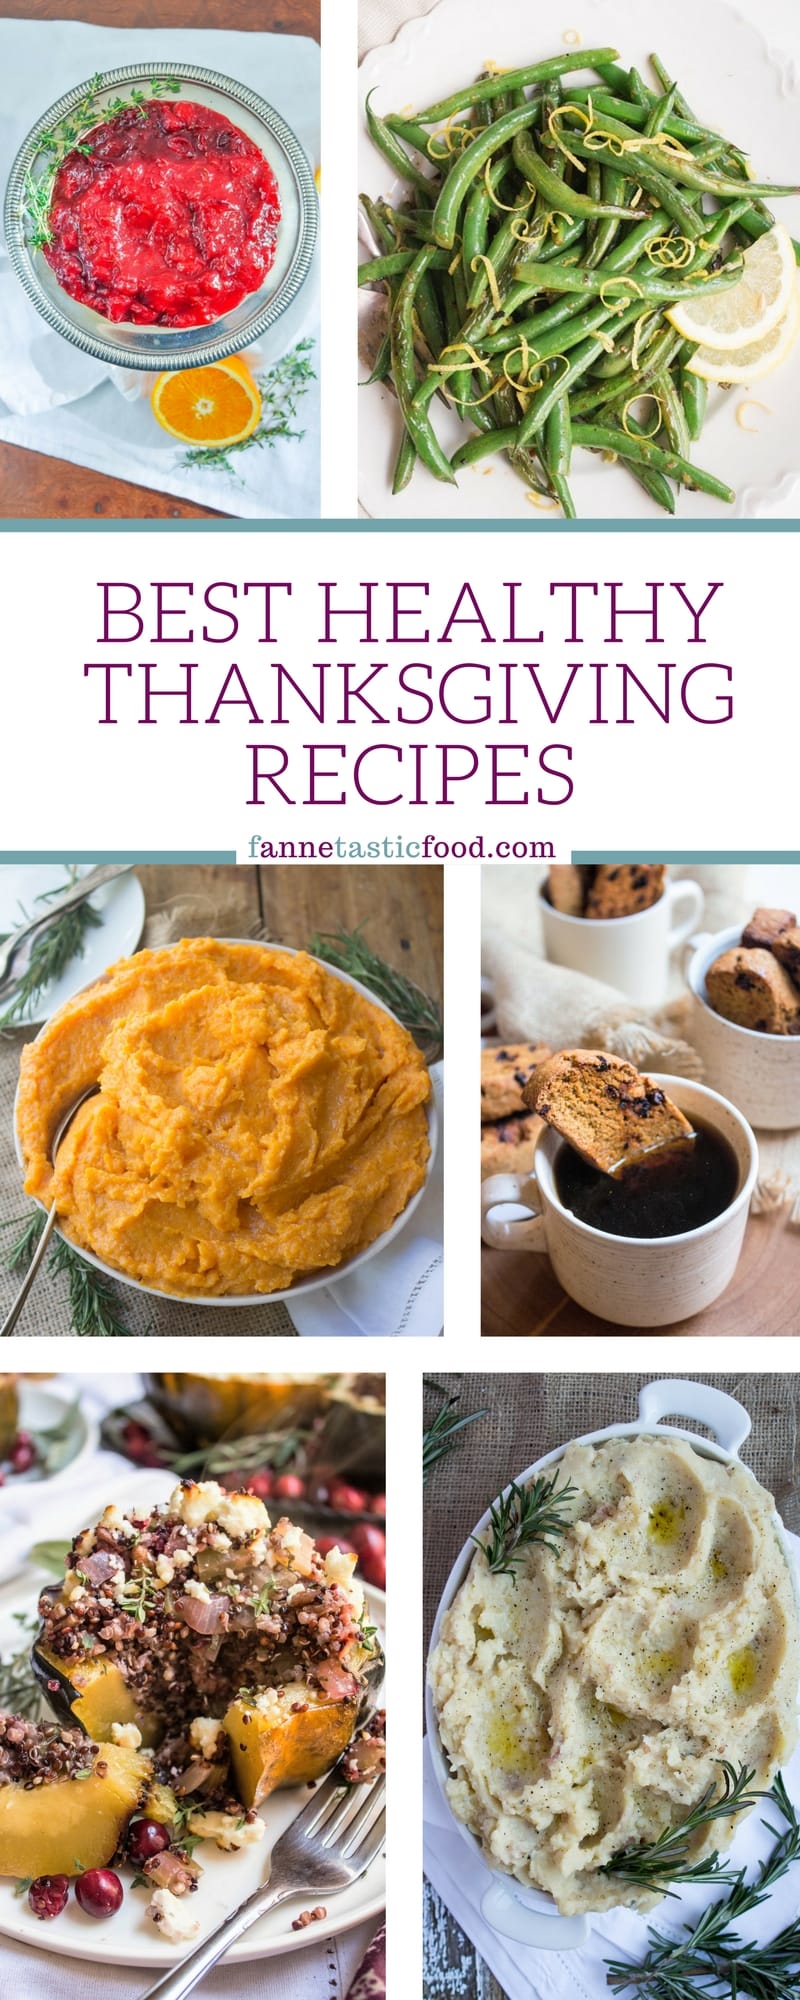 Best Healthy Thanksgiving Recipes | Fast, Easy